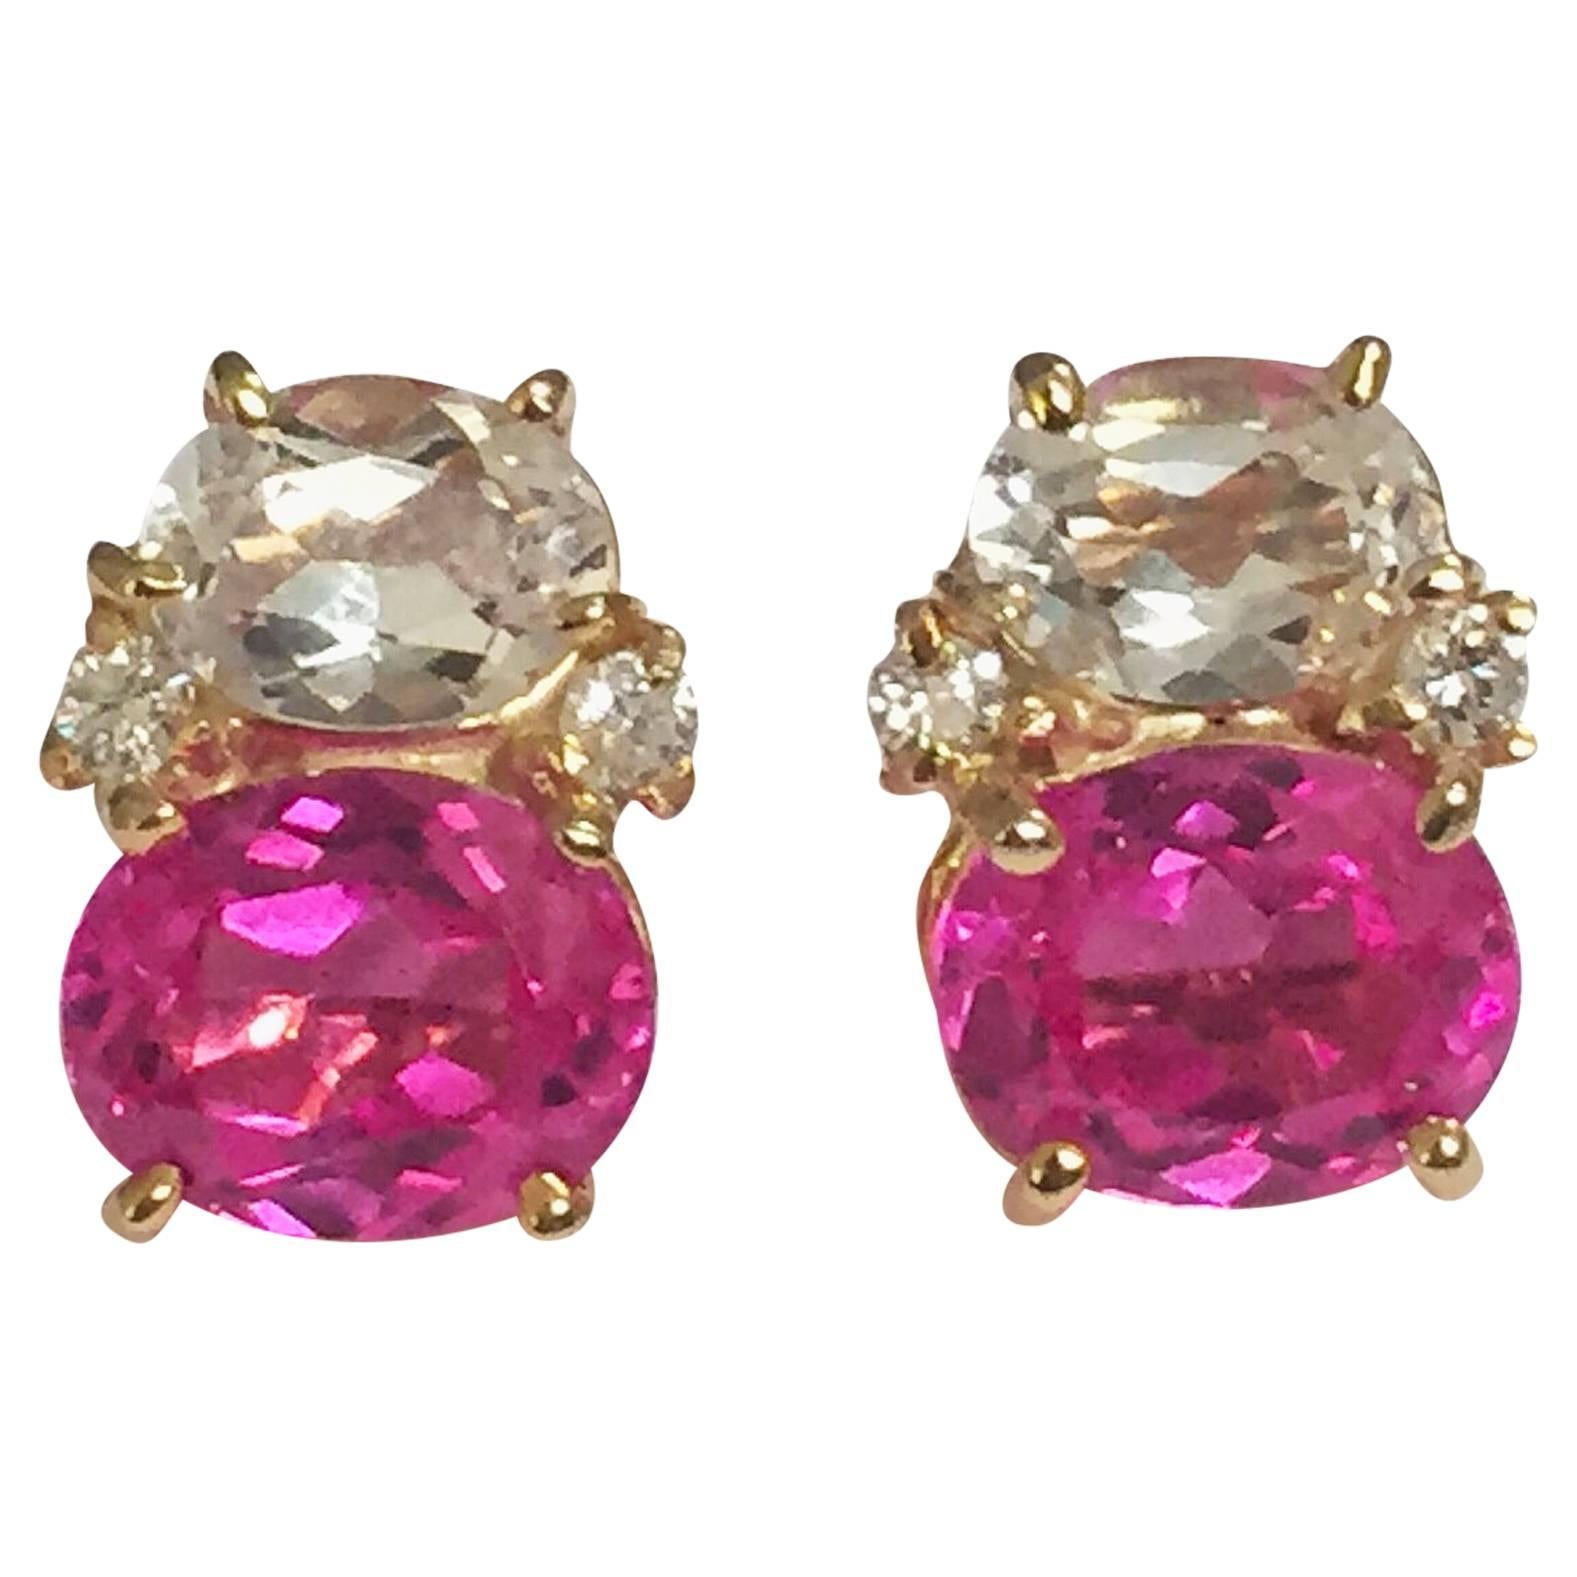 Mini GUM DROP Earrings with Rocky Crystal and Pink Topaz and Diamonds